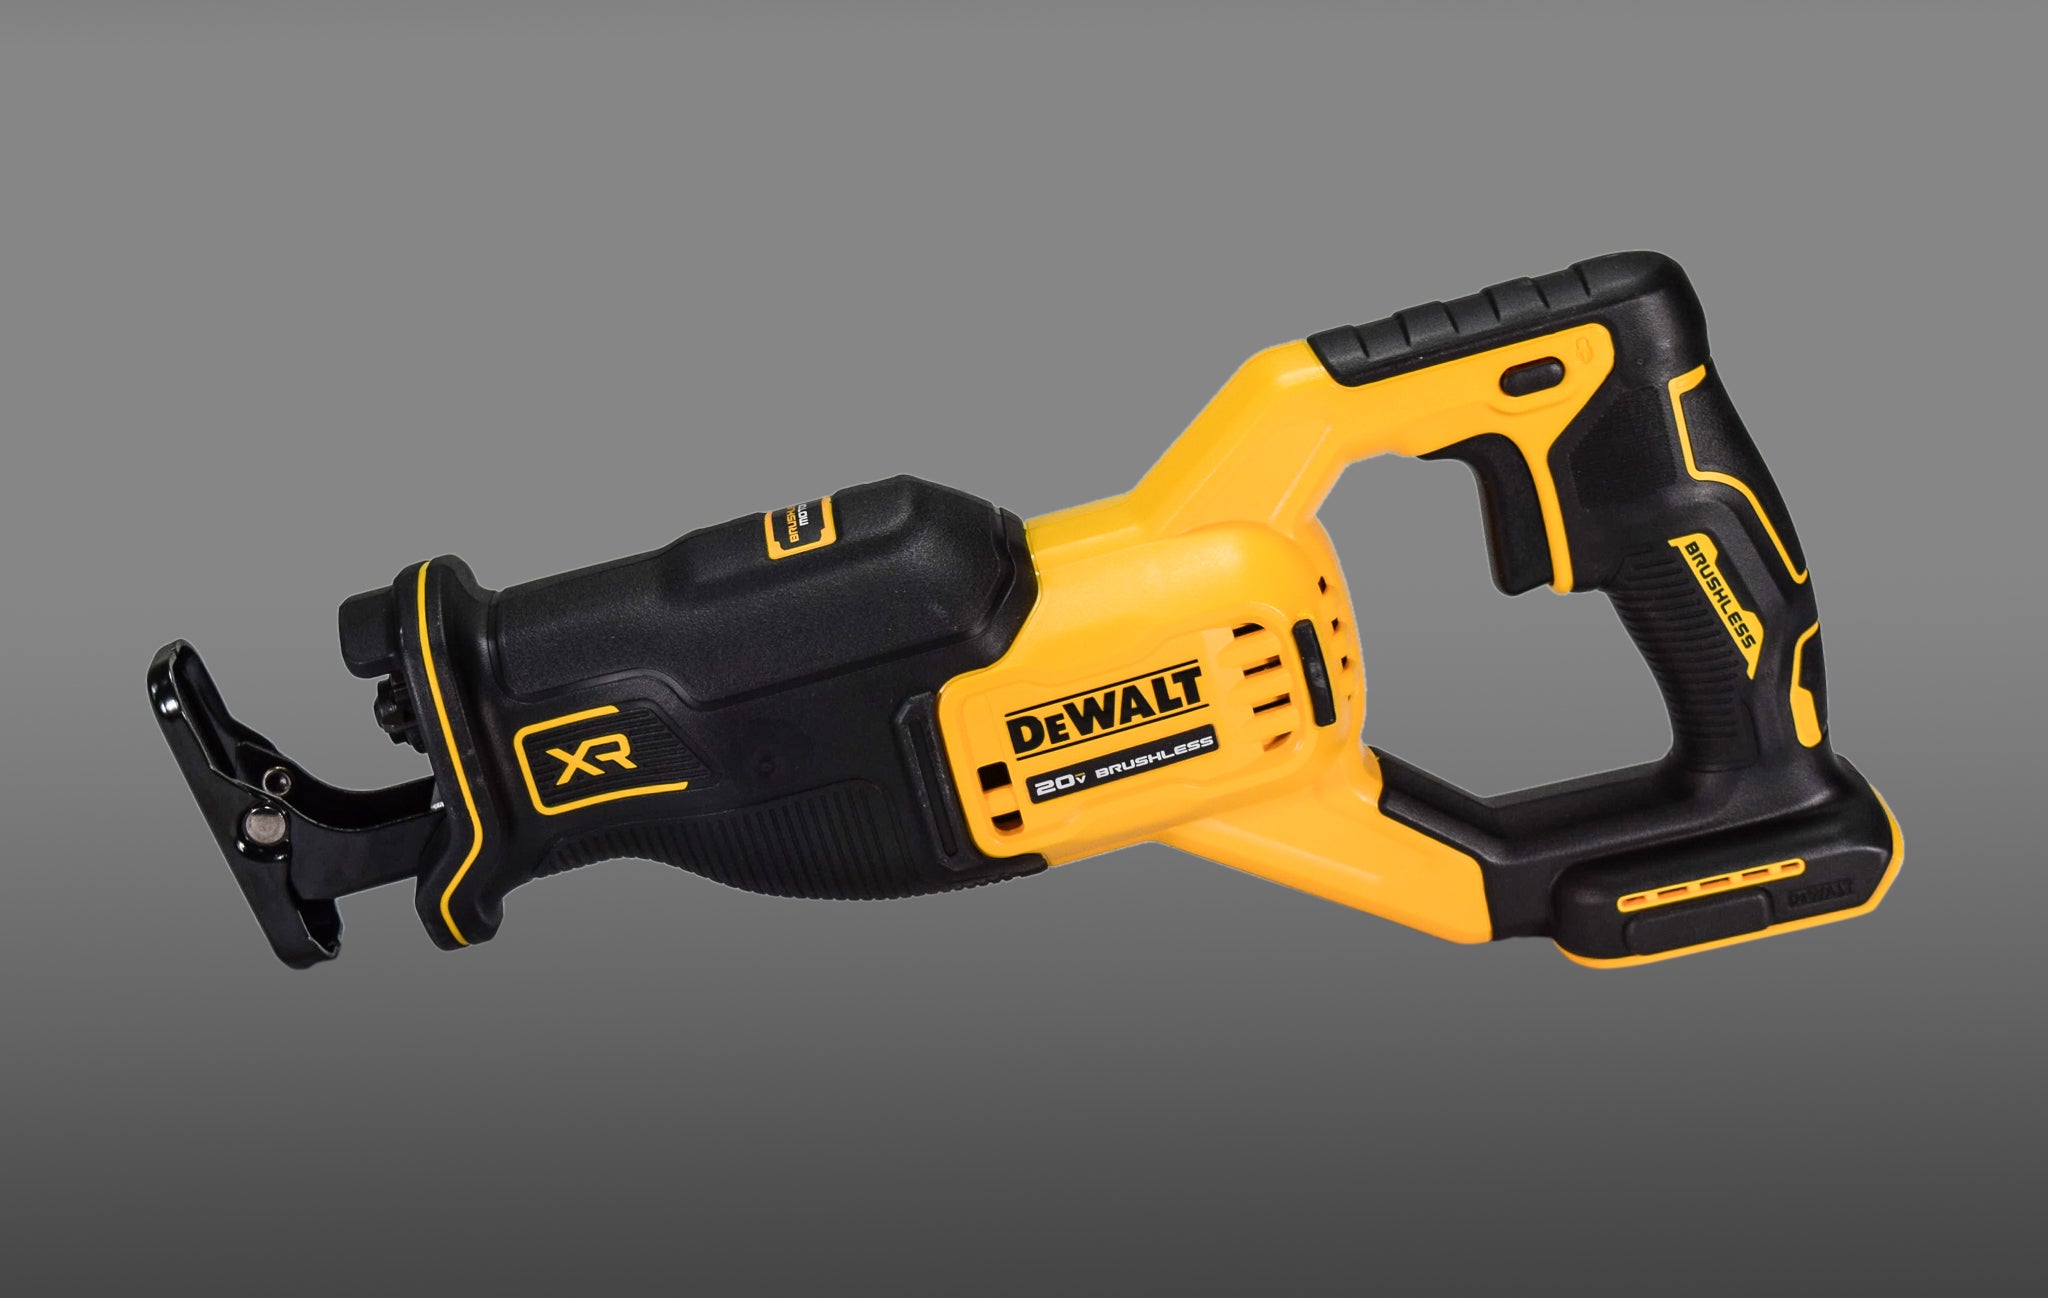 Dewalt DCS382B 20-Volt MAX Cordless Brushless Reciprocating Saw (Tool-Only)